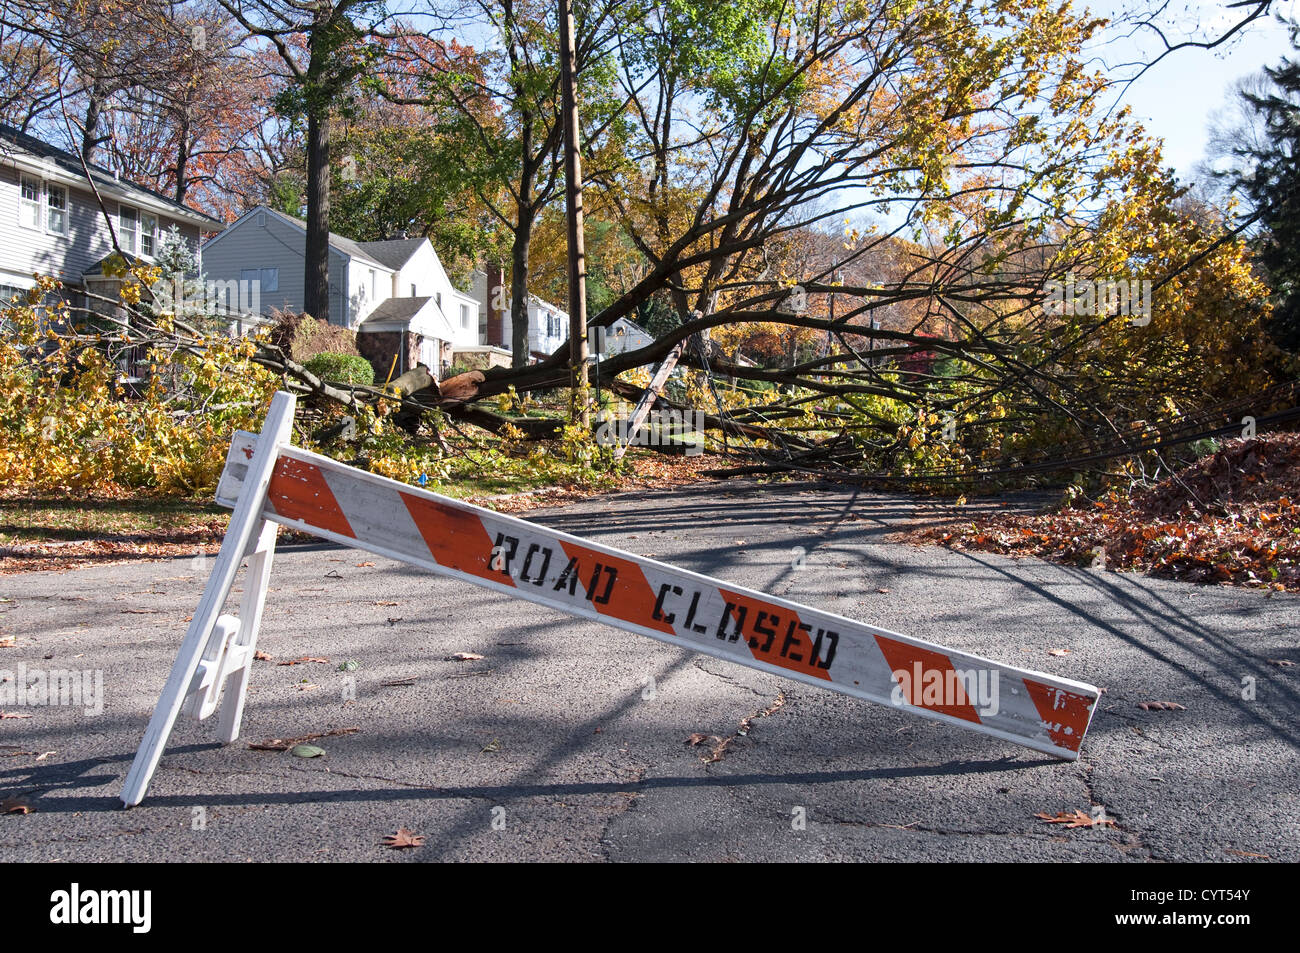 Damage caused by Hurricane Sandy in Tenafly, New Jersey, USA. A fallen tree has taken out utility cables. Stock Photo